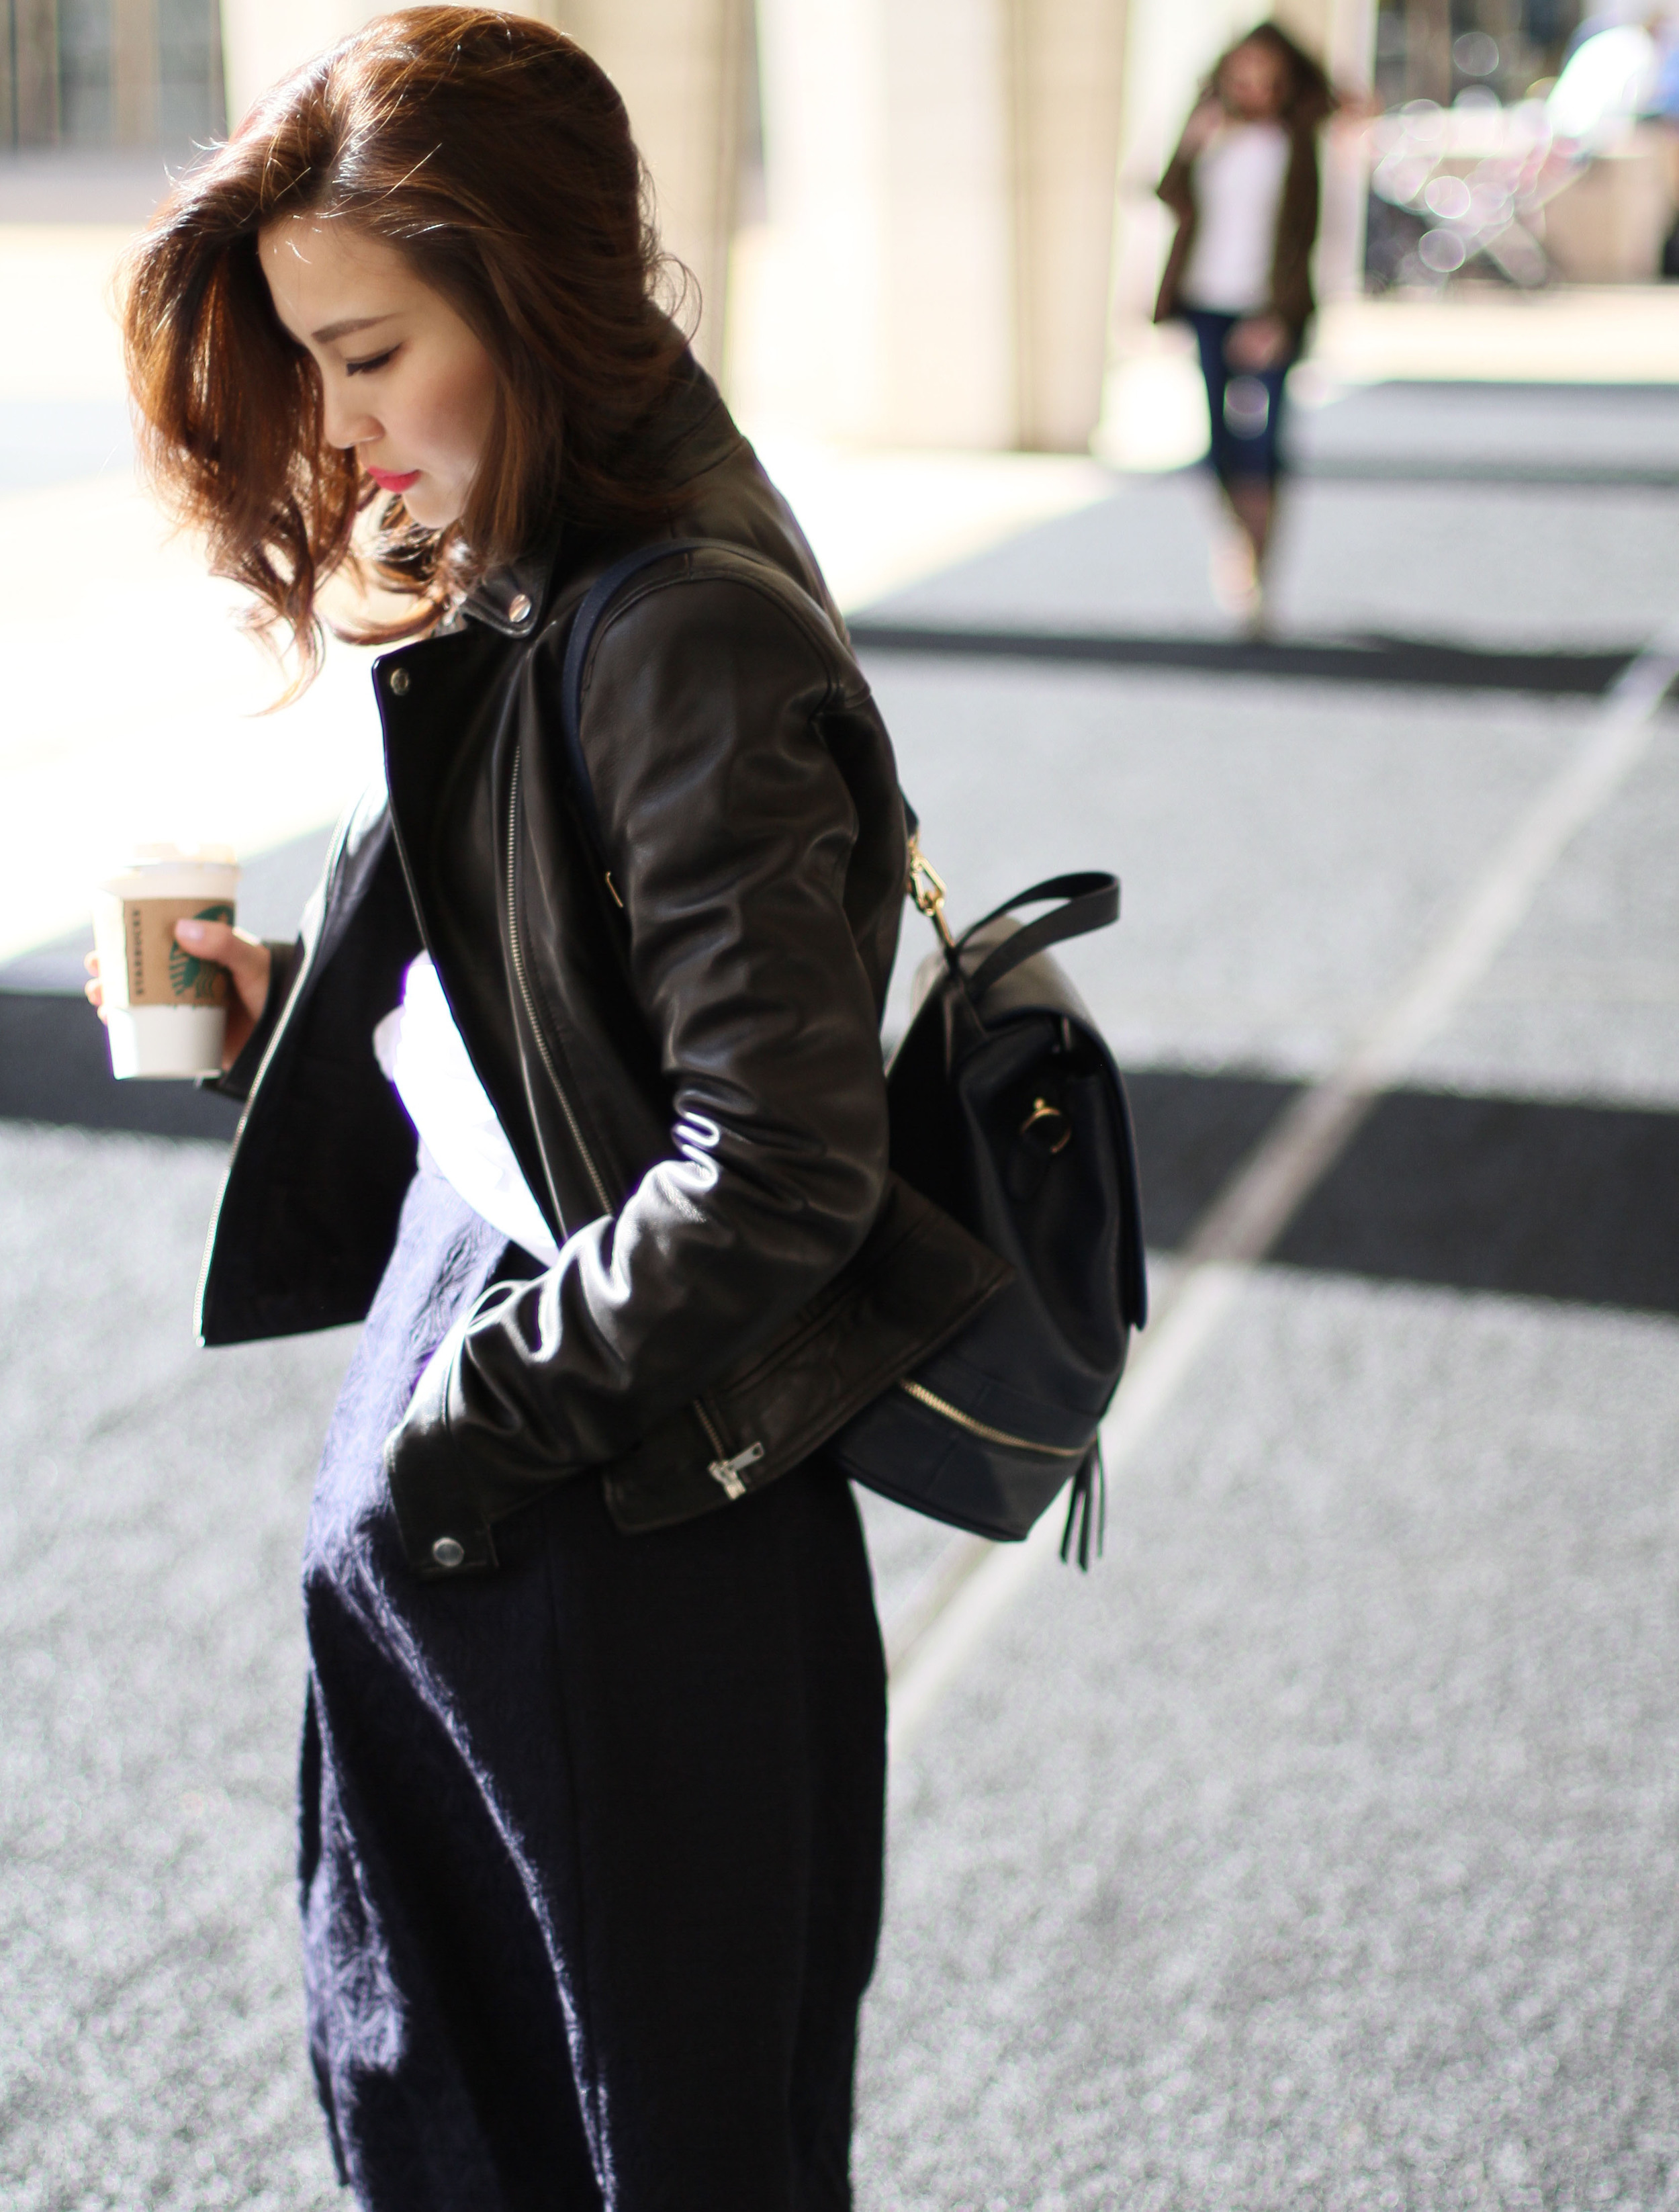 Navy Backpack leather jacket outfit 1.jpg